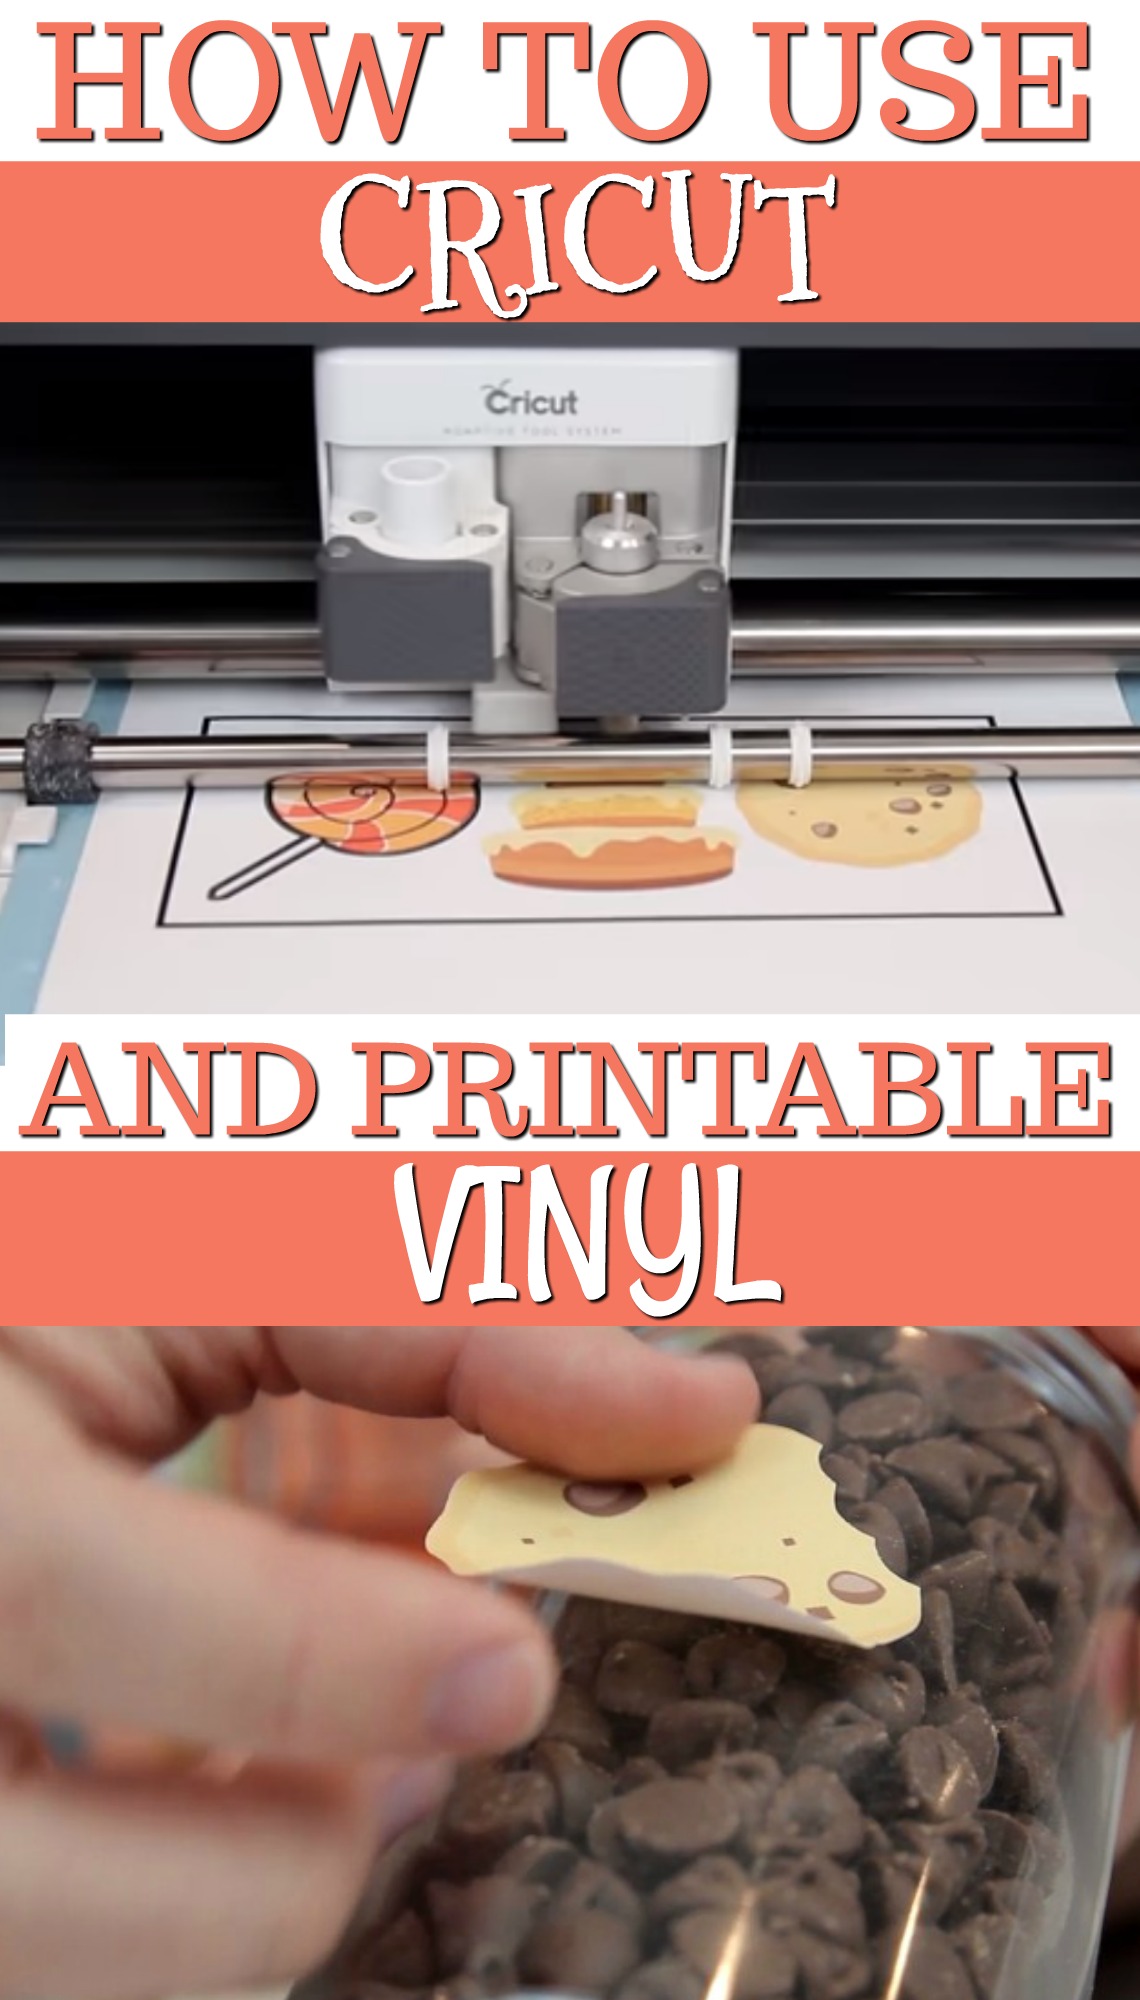 How To Use Cricut Printable Vinyl - A Little Craft In Your Day